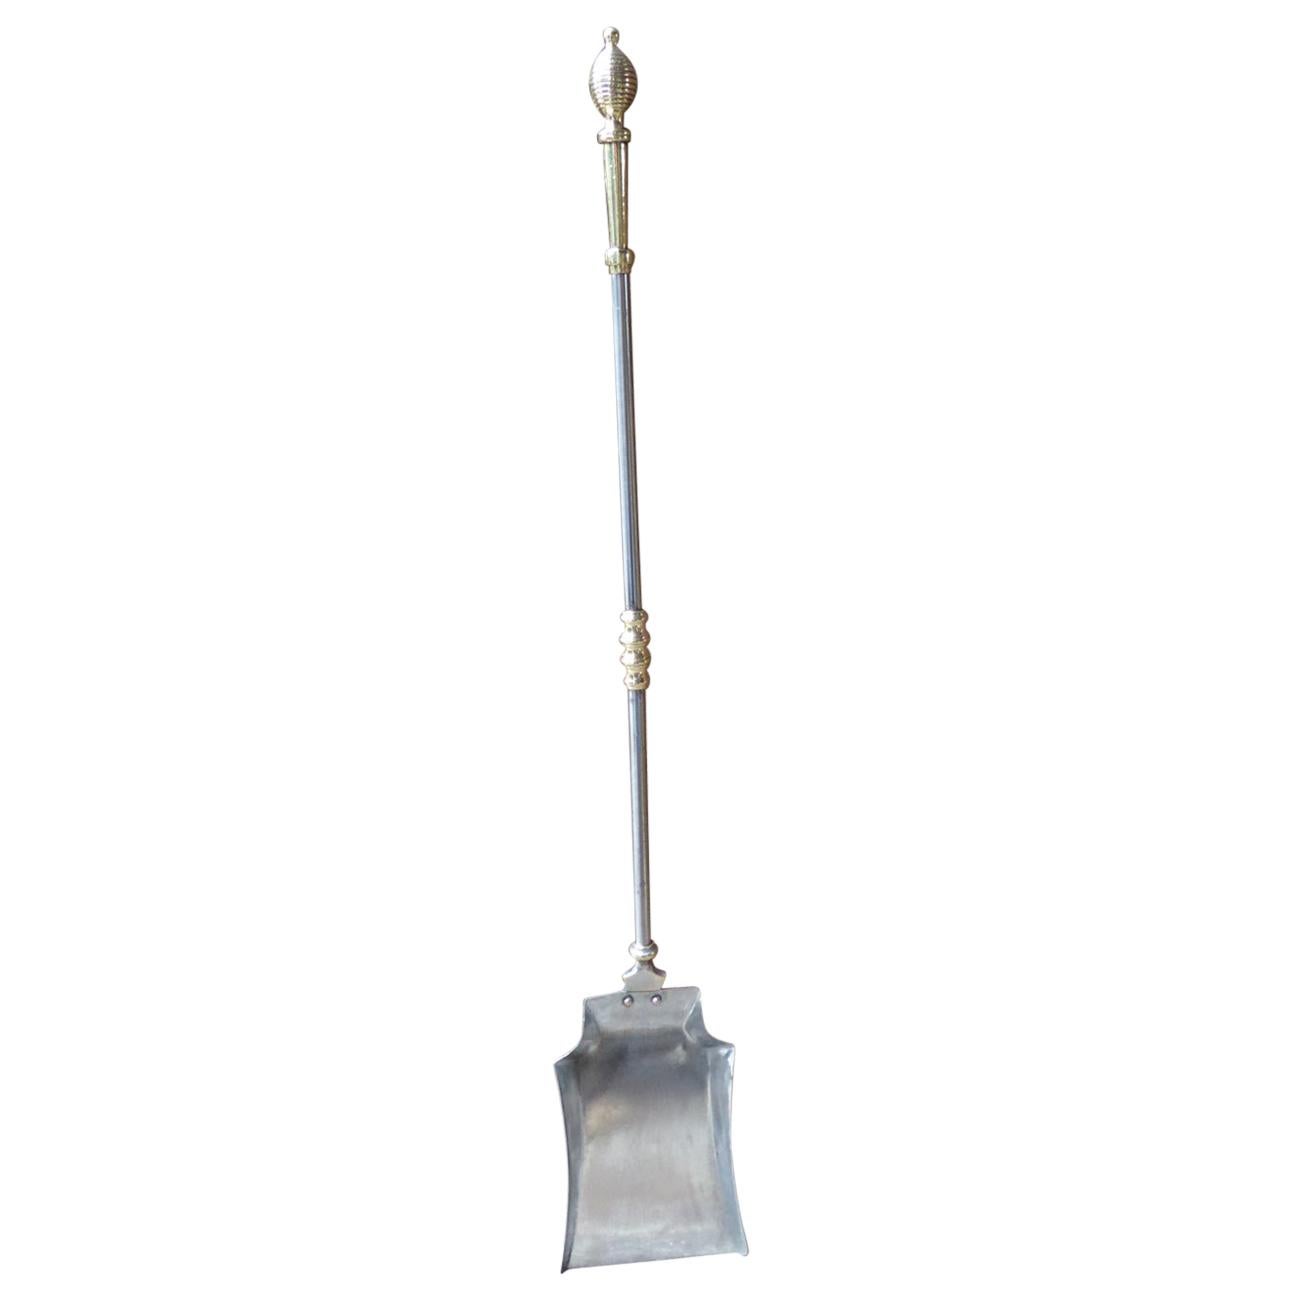 Large 19th Century English Victorian Fireplace Shovel or Fire Shovel For Sale